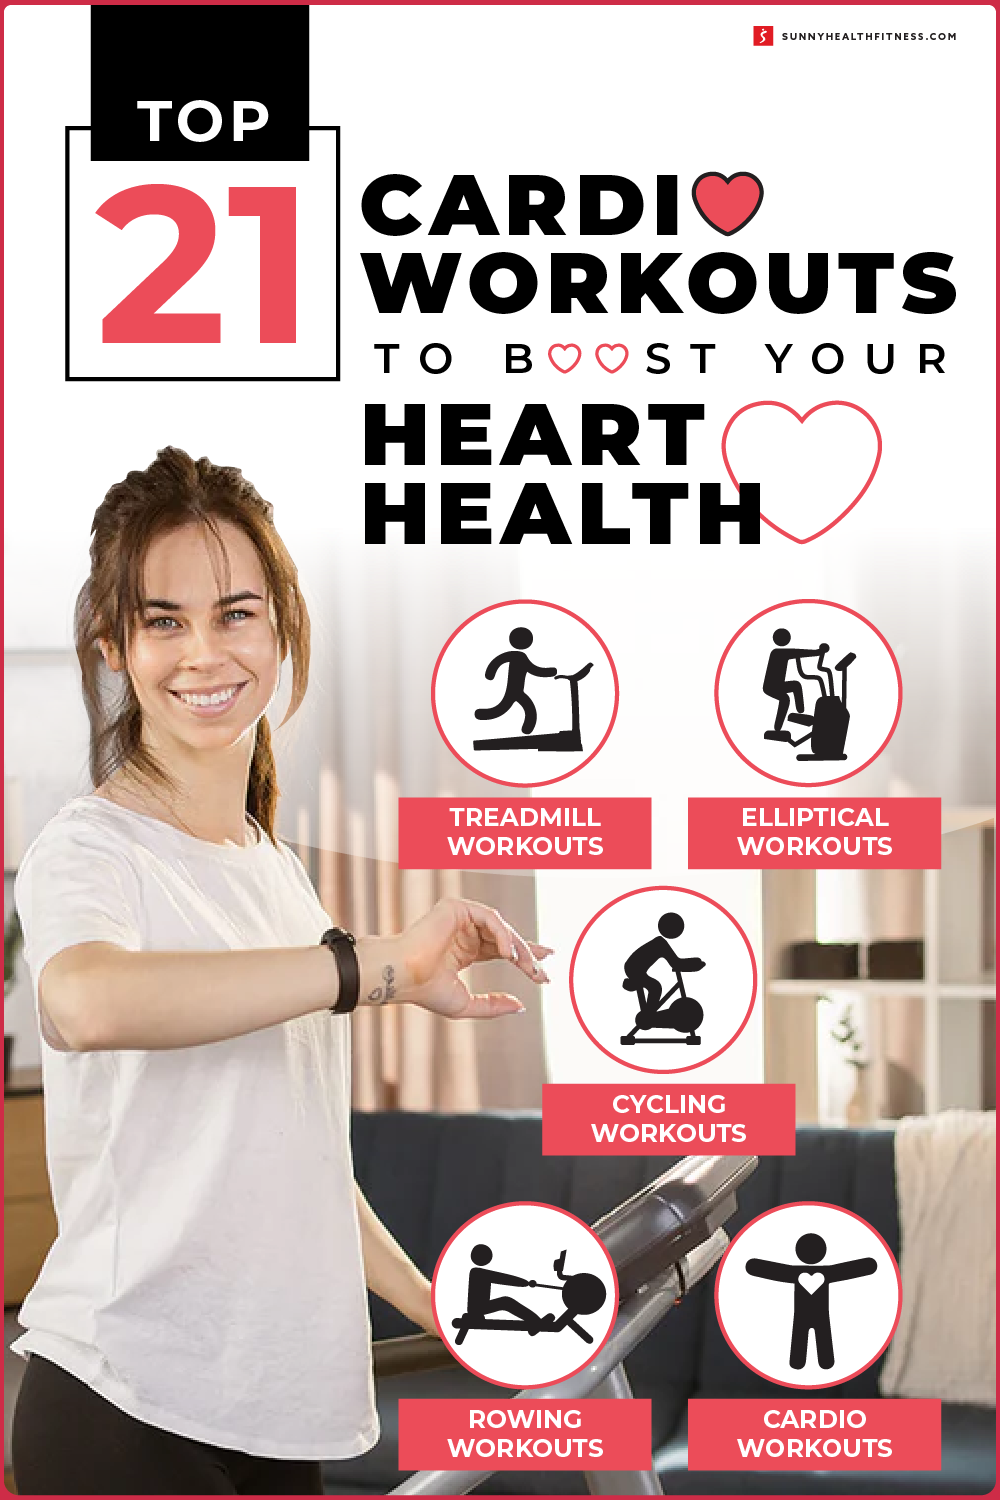  Cardio Workouts to Boost Your Heart Health